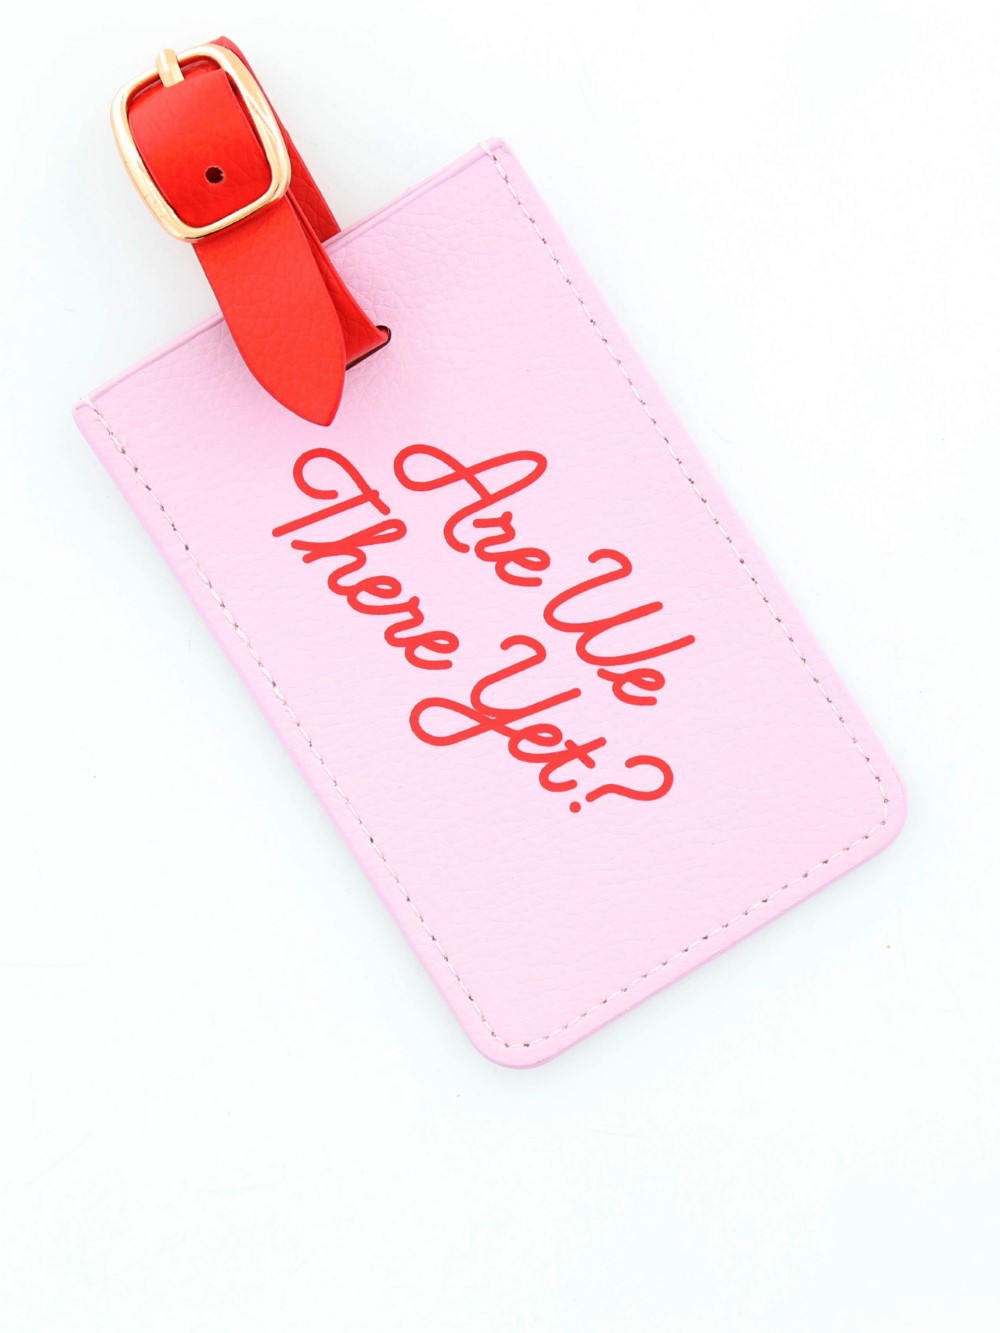 Yes Studio Are We There Yet? Luggage Tag